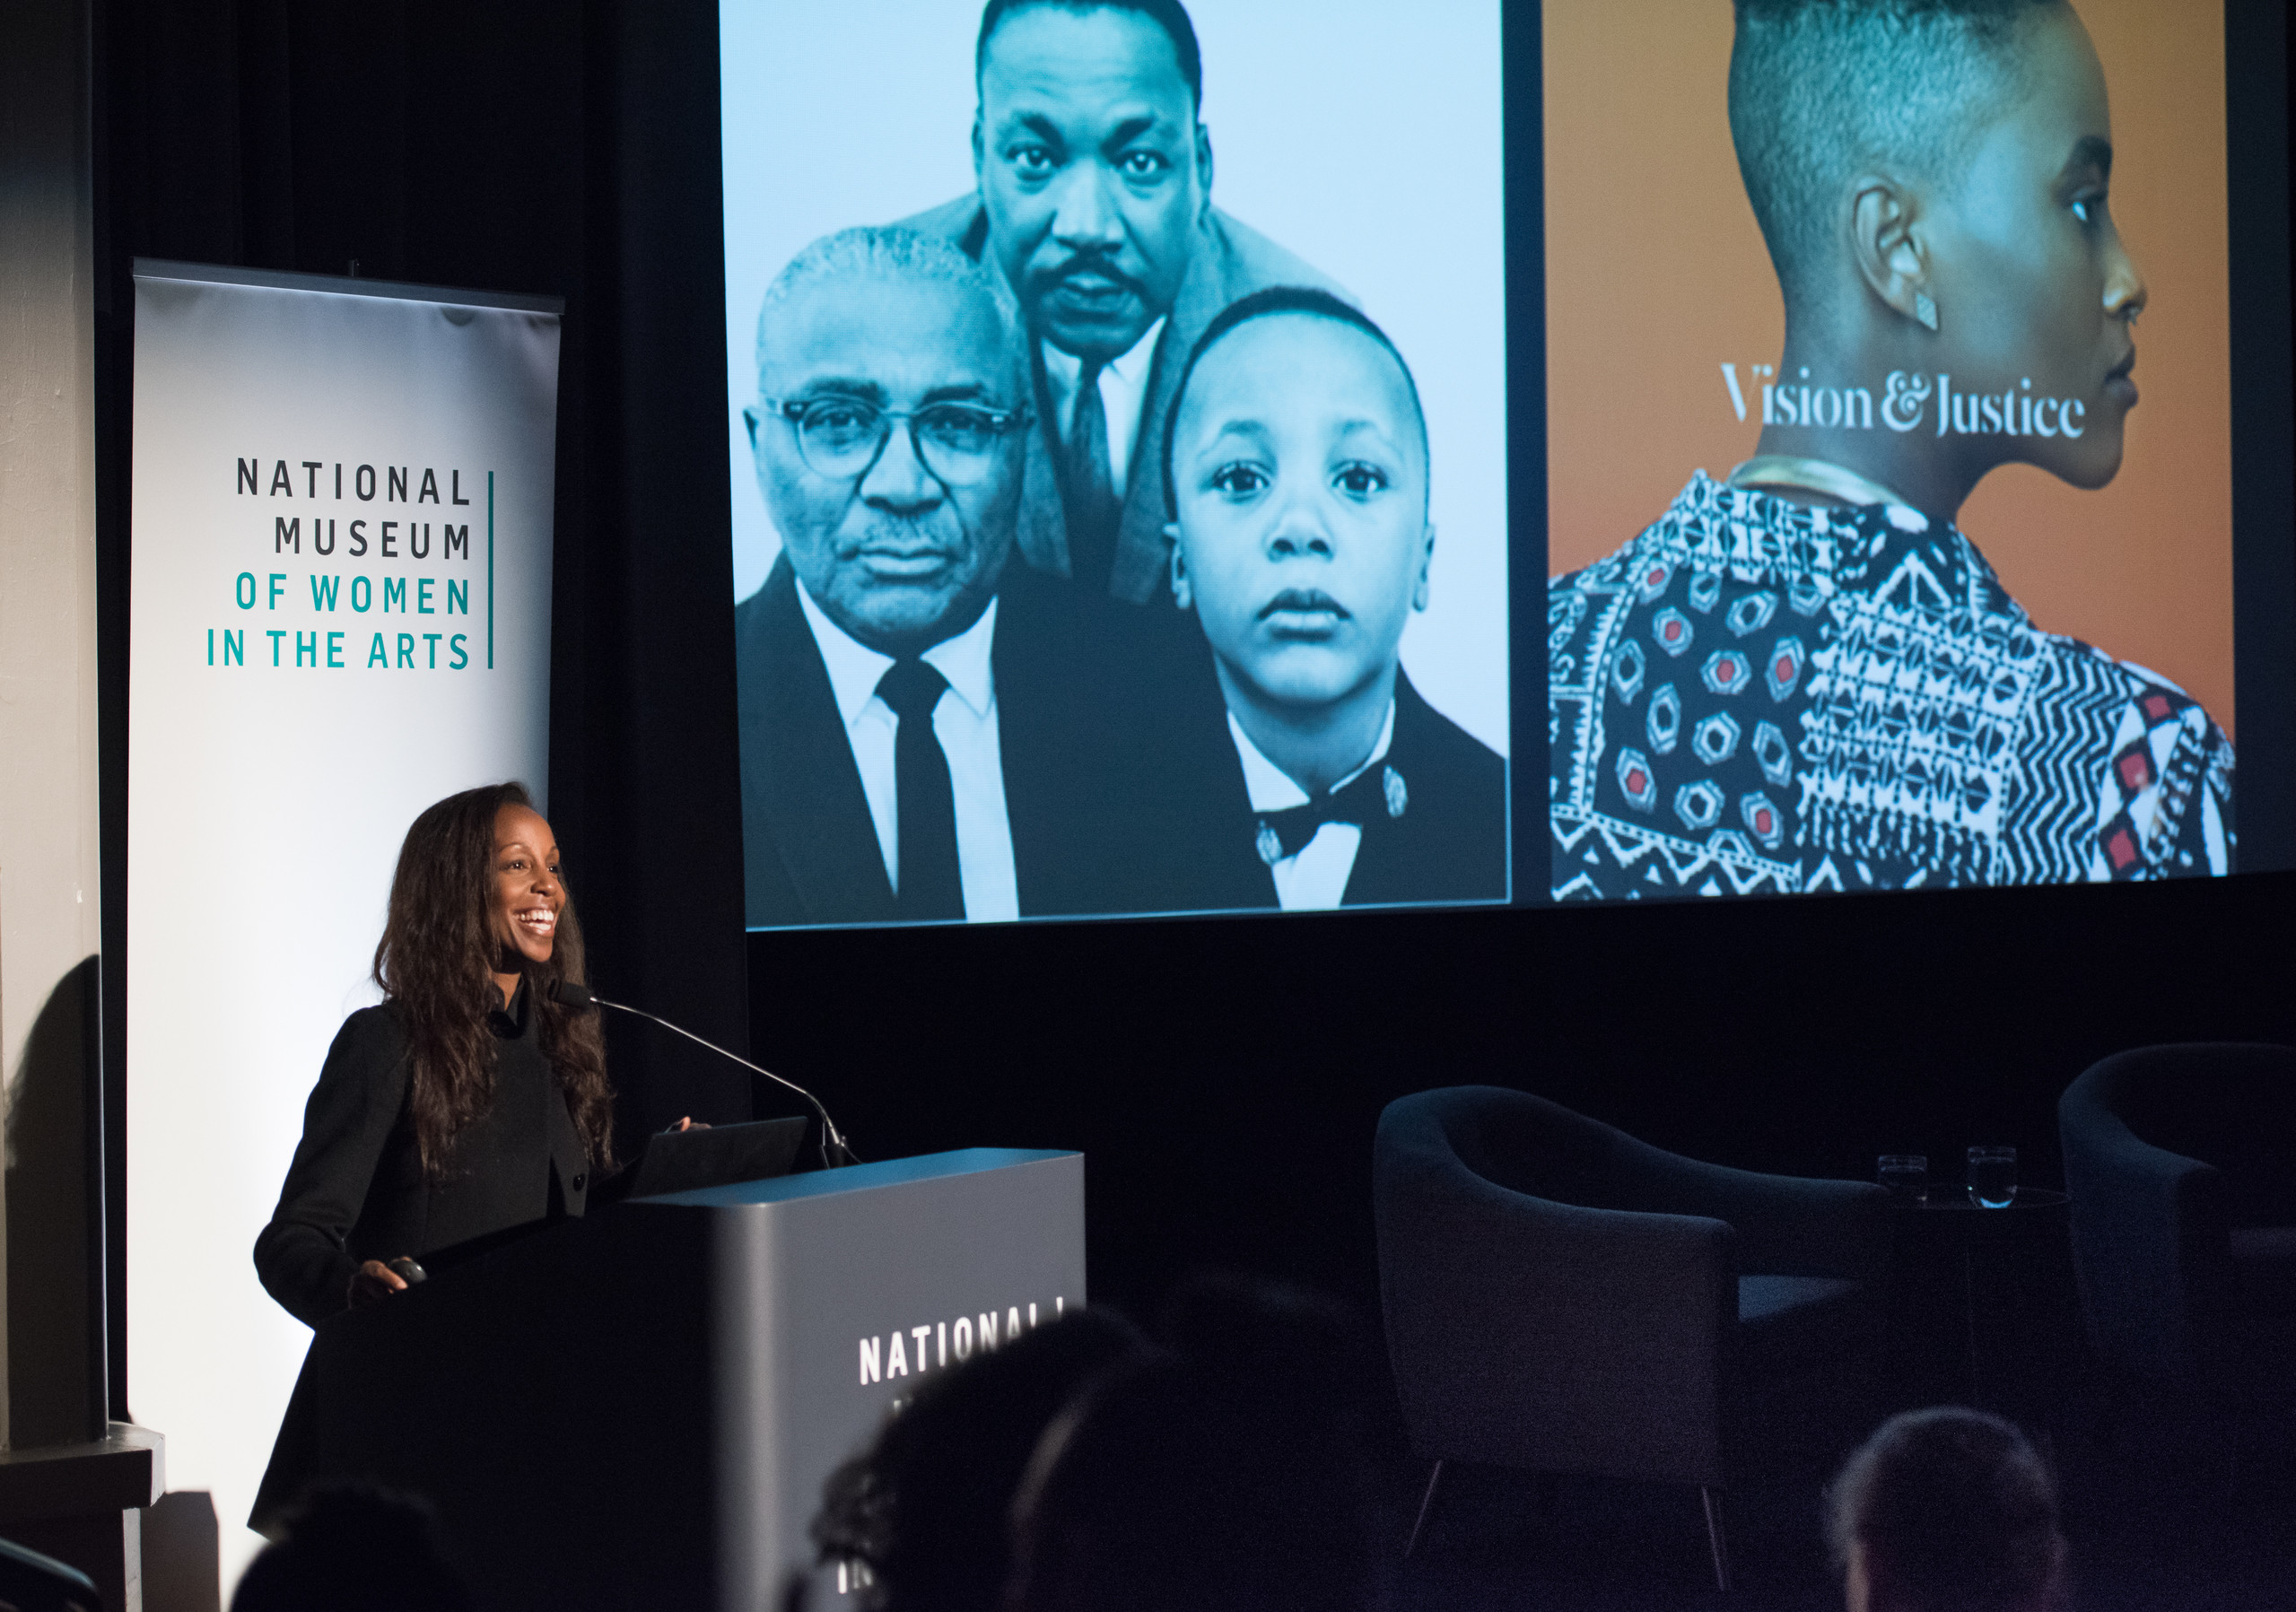 A dark-skinned woman stands at a podium and smiles out at an audience. To her right, on a large presentation screen, are two photographs. One is a black and white portrait of three dark-skinned men including Martin Luther King Jr, the other features a dark-skinned man in profile against an orange background.